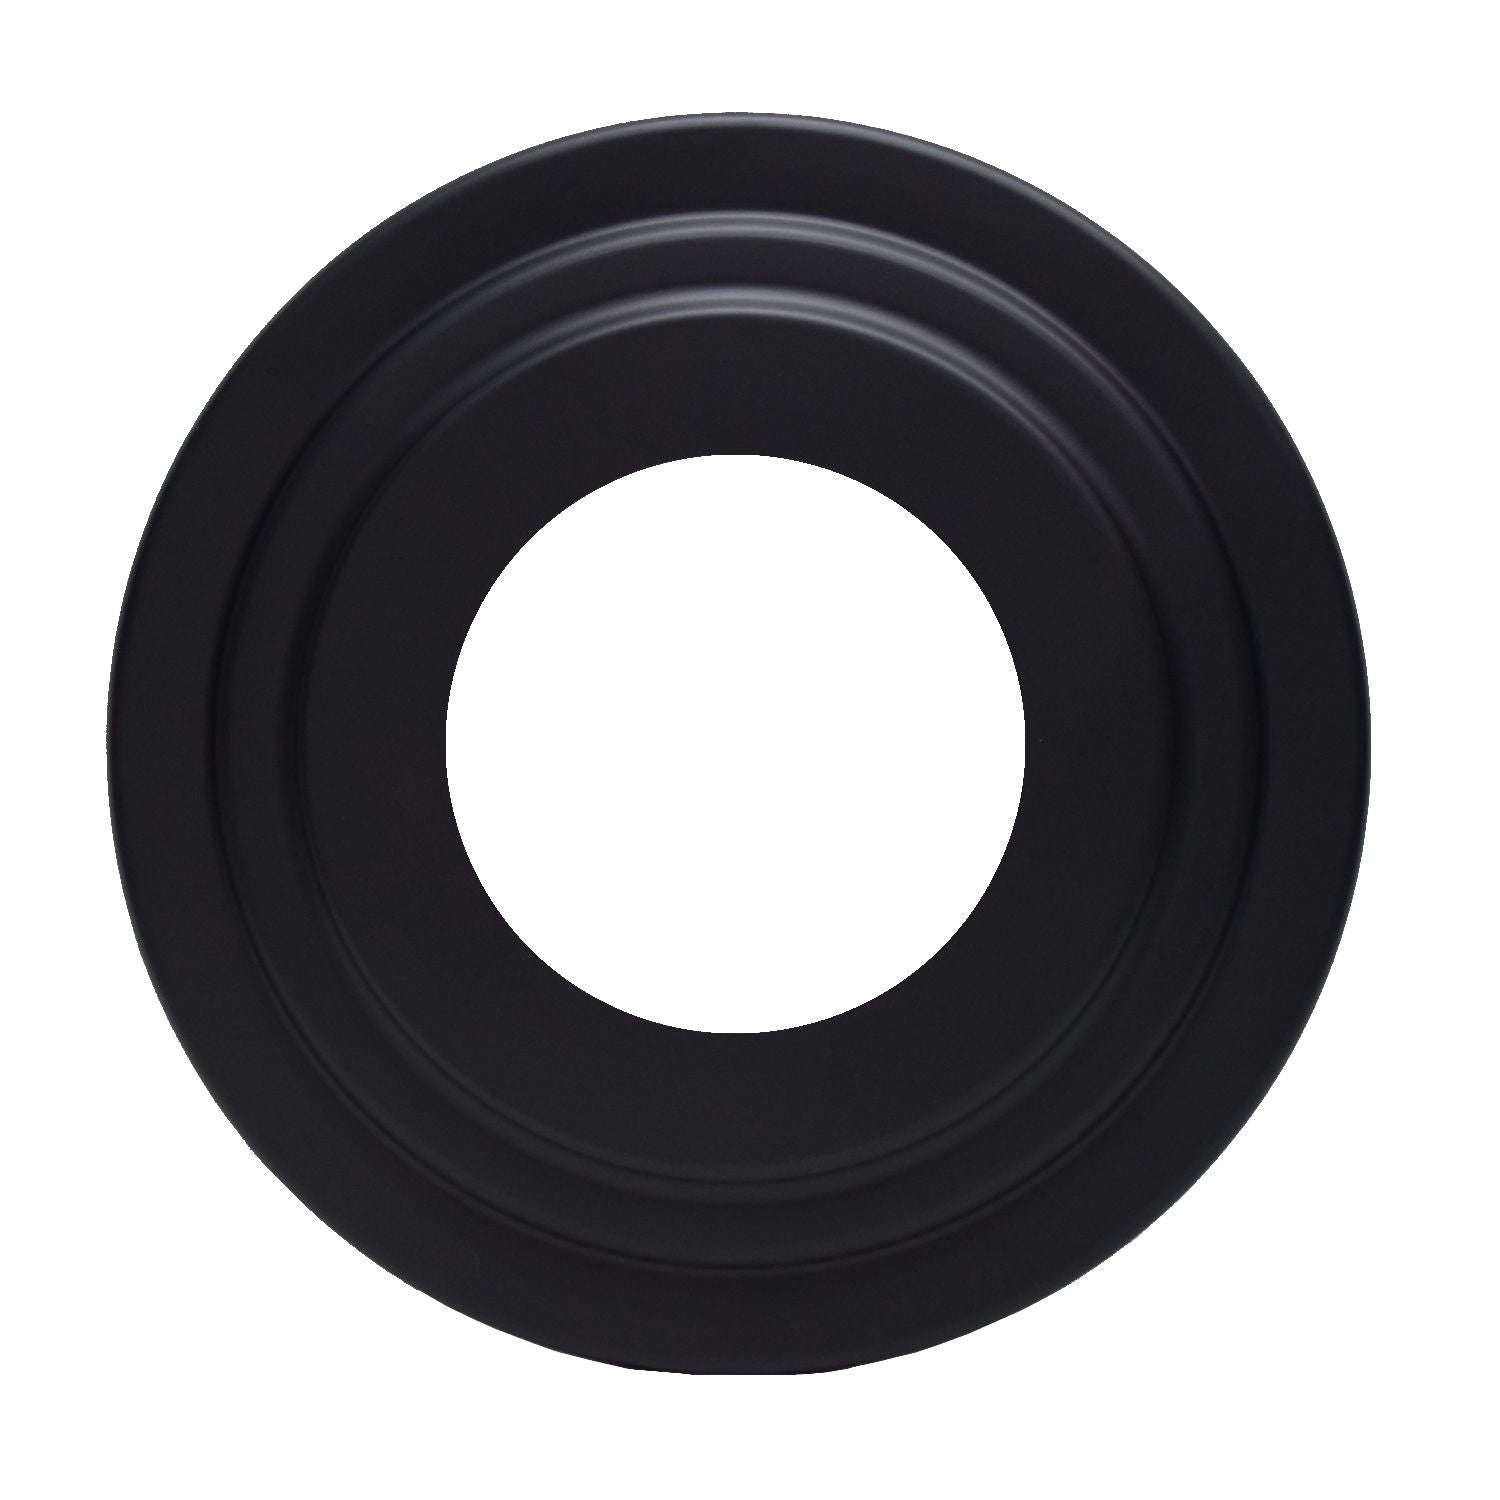 8" RSF Floor/Ceiling Uninsulated Ring - Black